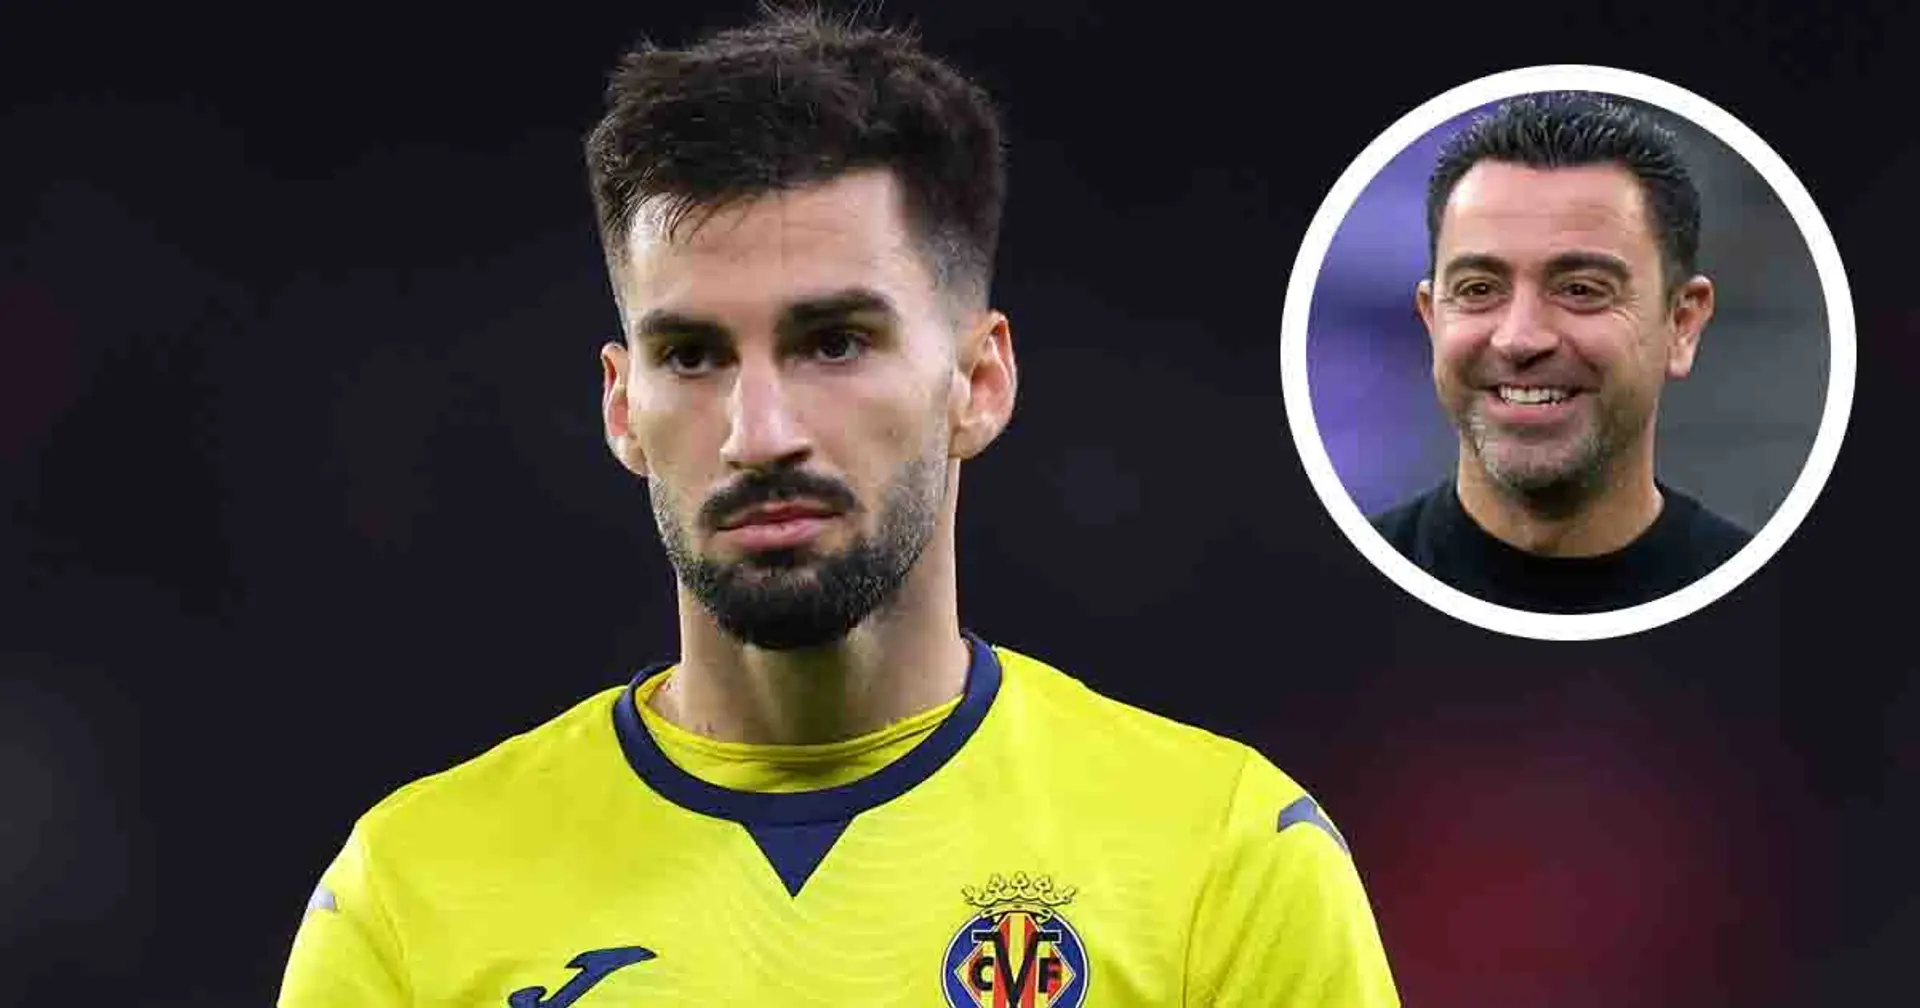 Barca hold advantage in potential Alex Baena signing due to Villarreal's demand (reliability: 4 stars)